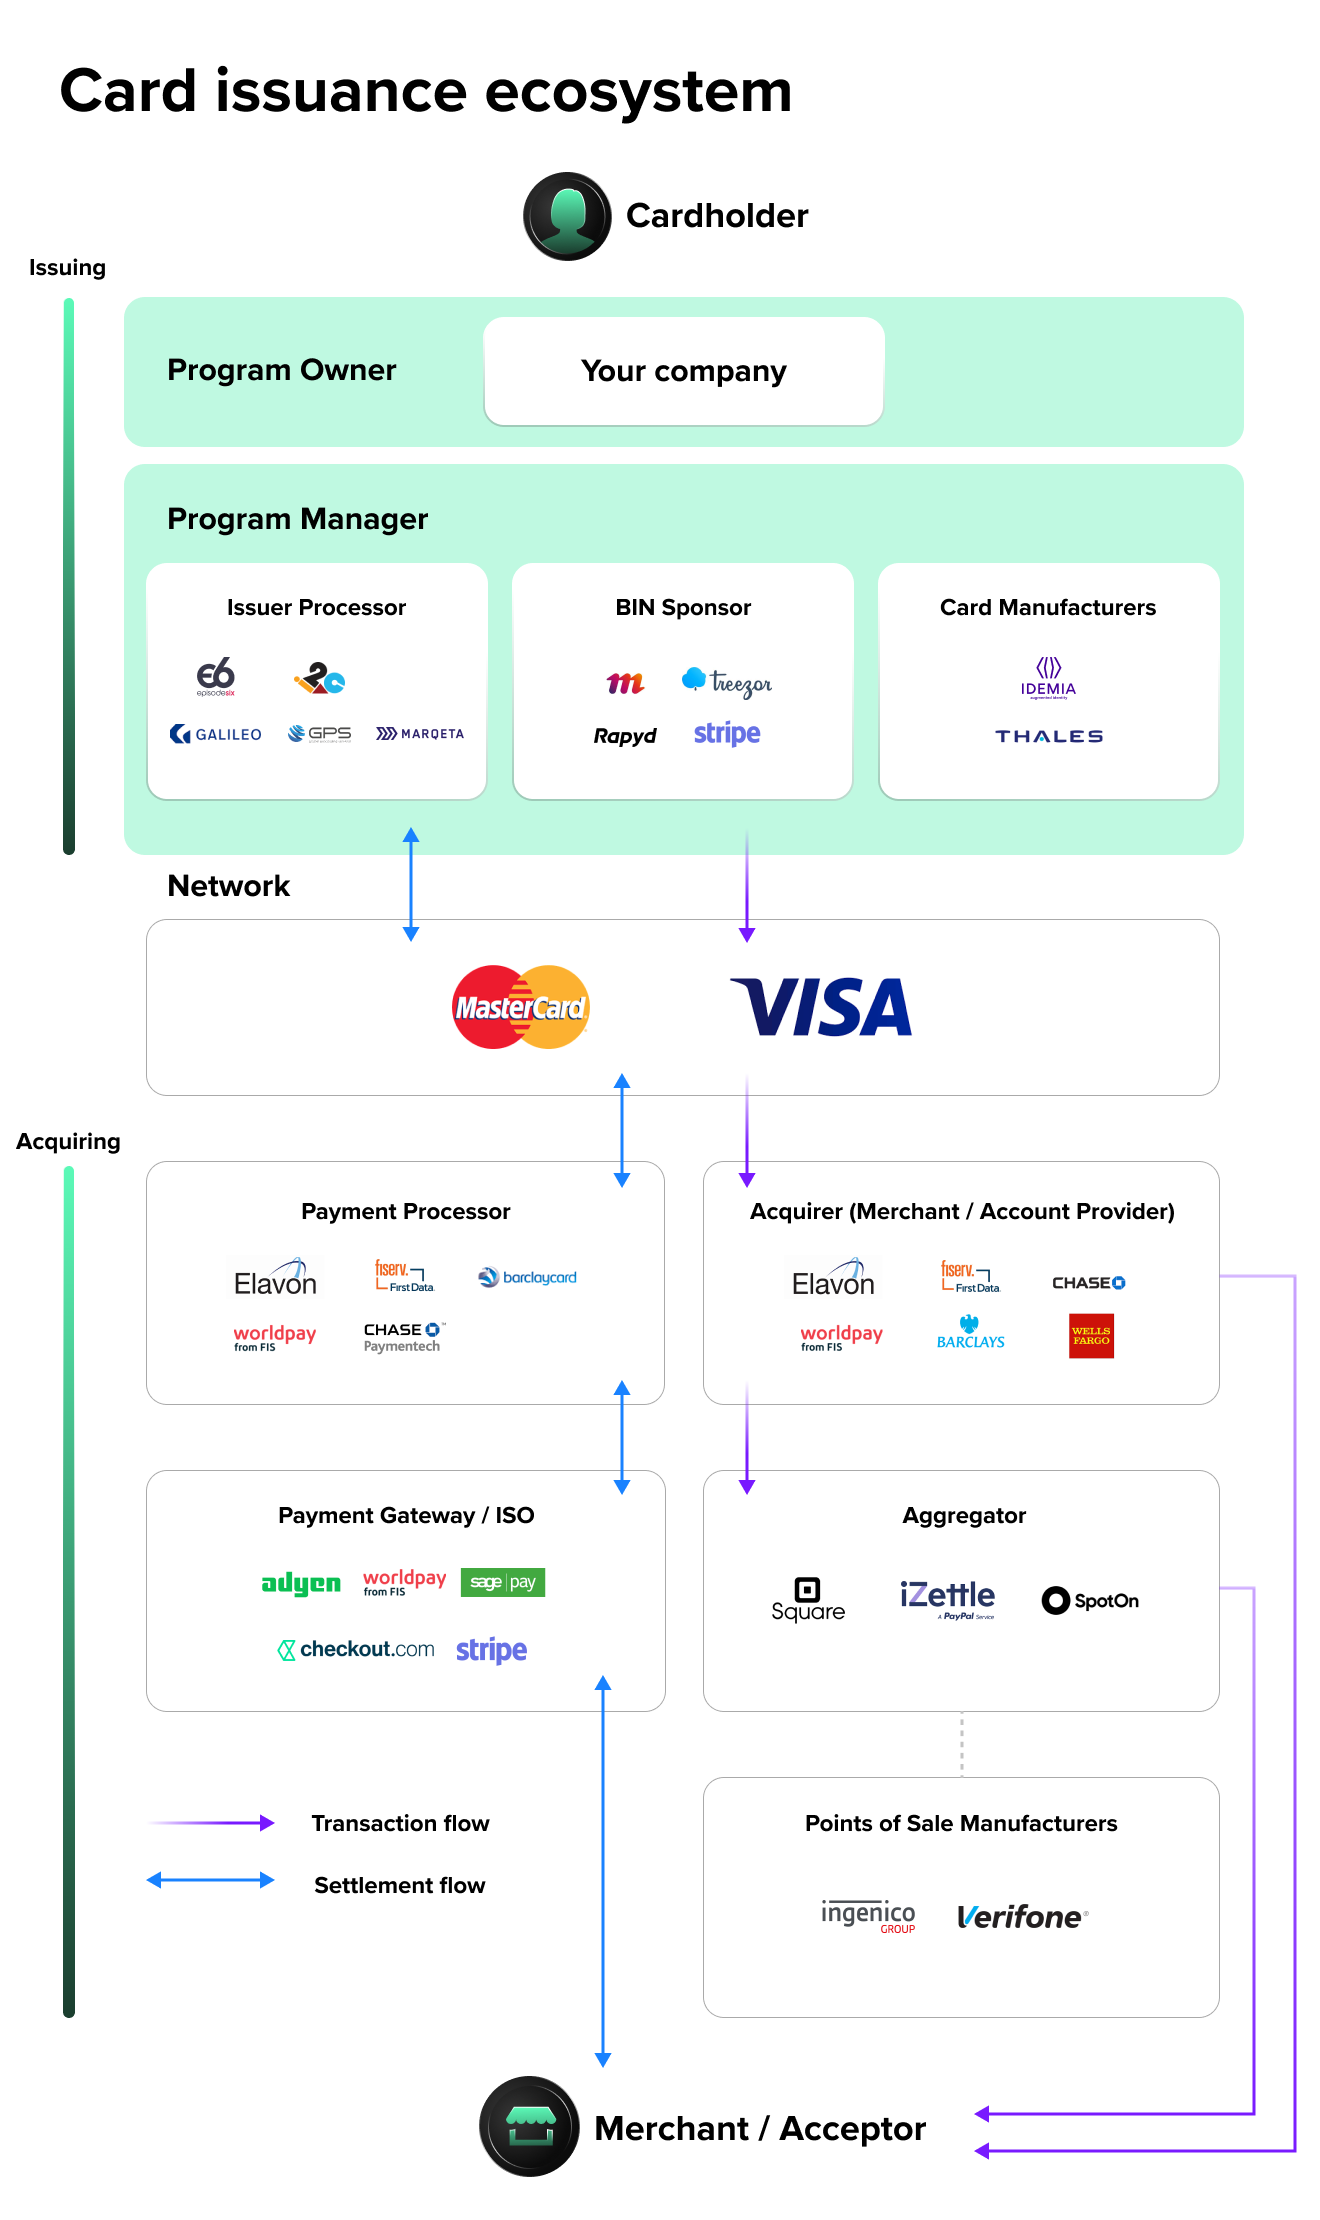 Card issuance ecosystem EN